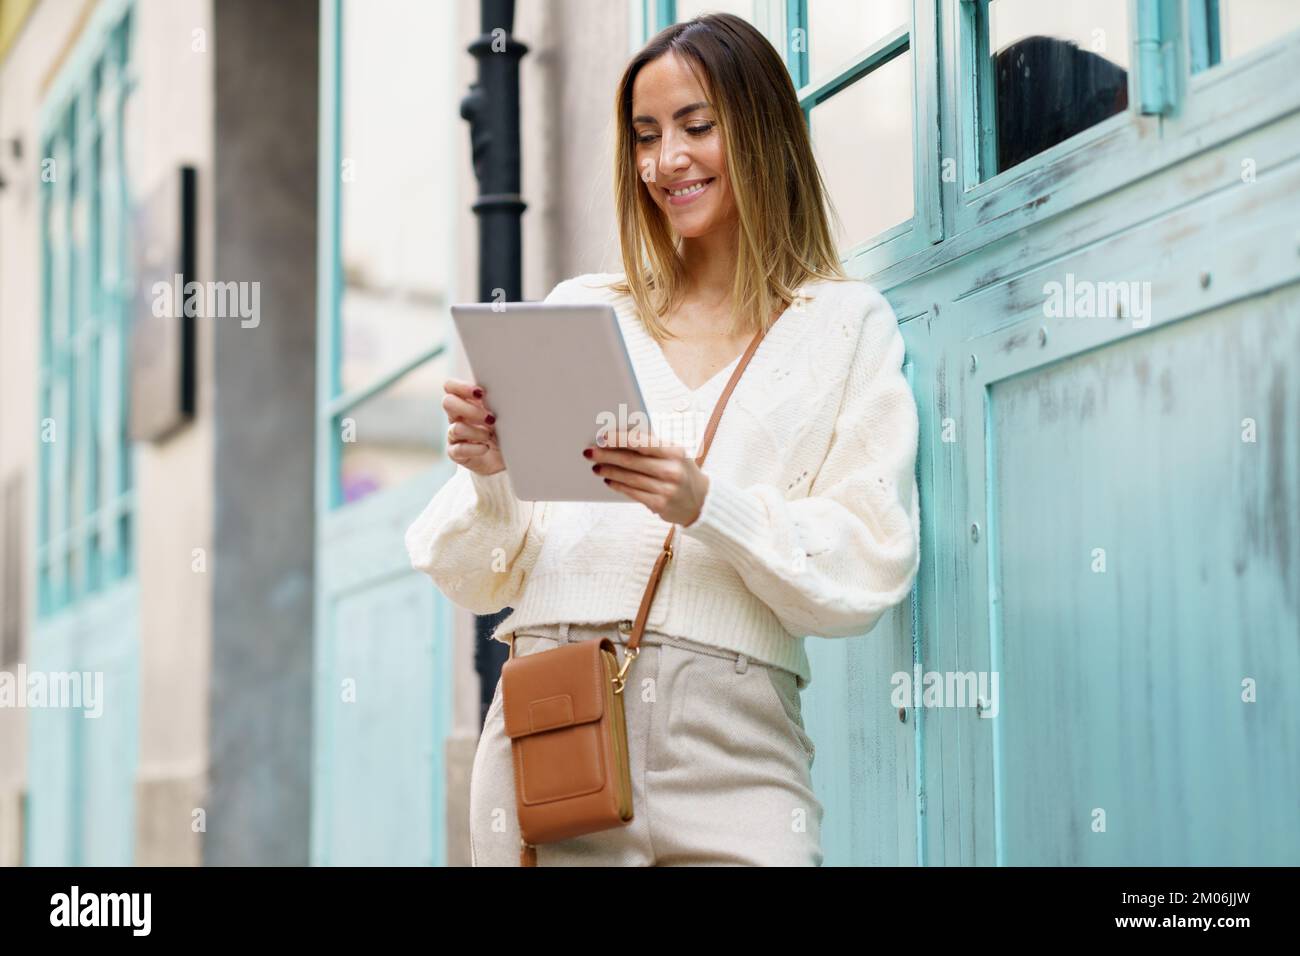 Cheerful woman with tablet standing on street Stock Photo